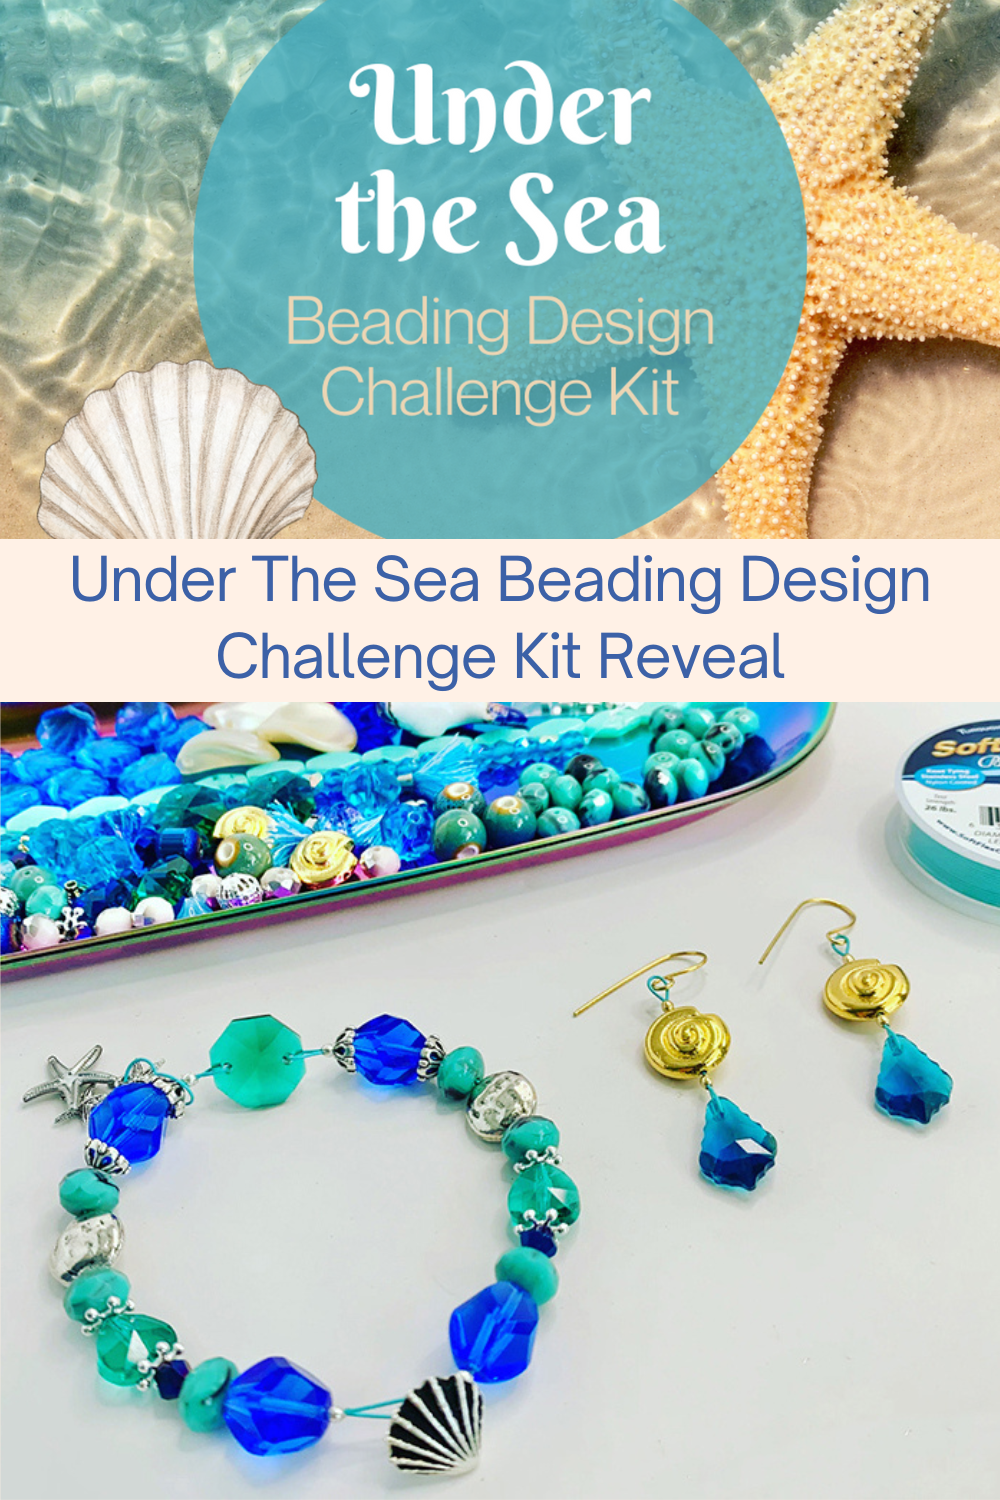 Under The Sea Beading Design Challenge Kit Reveal Collage